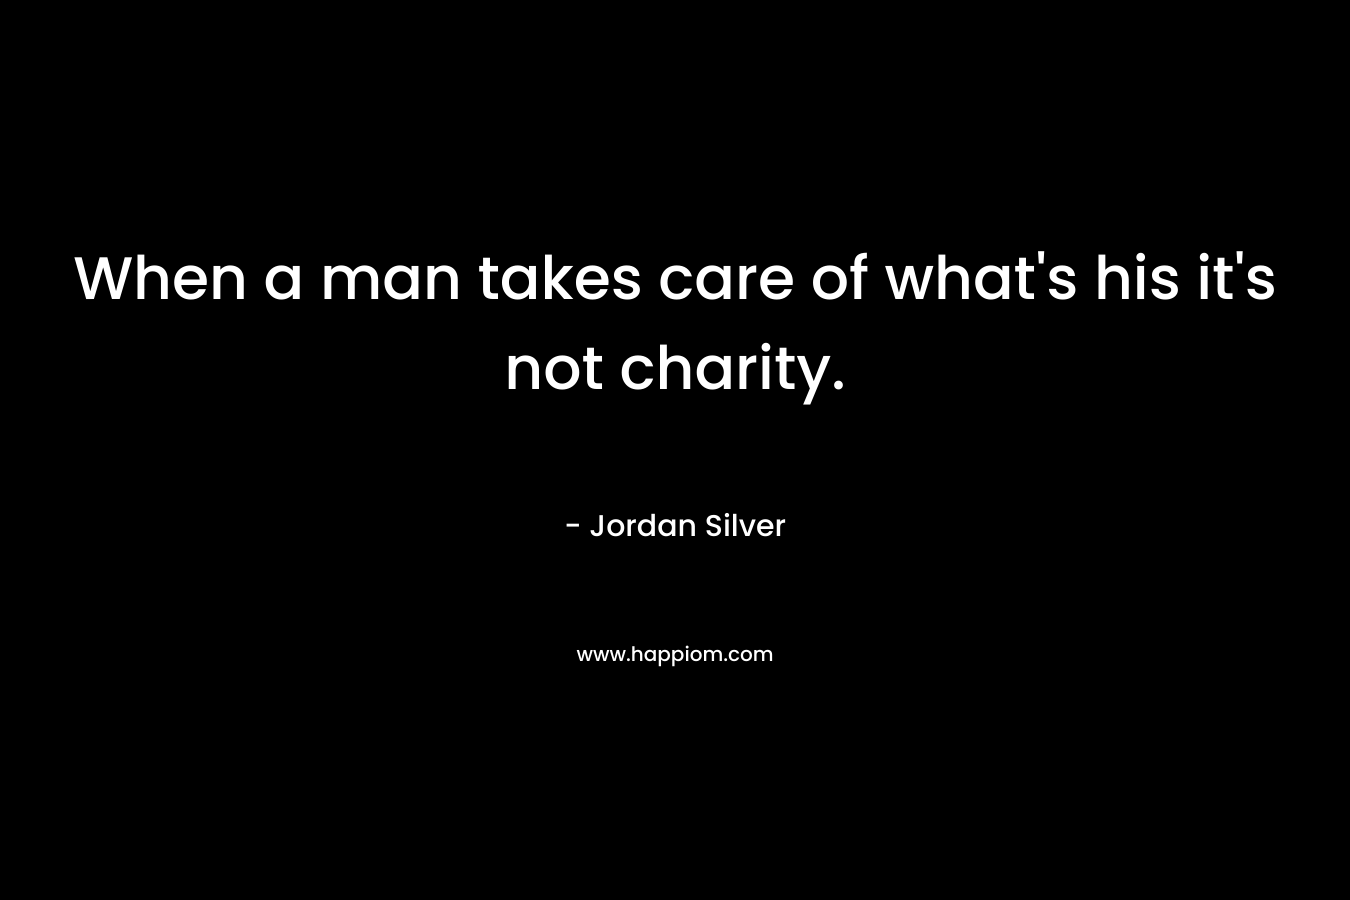 When a man takes care of what’s his it’s not charity. – Jordan Silver